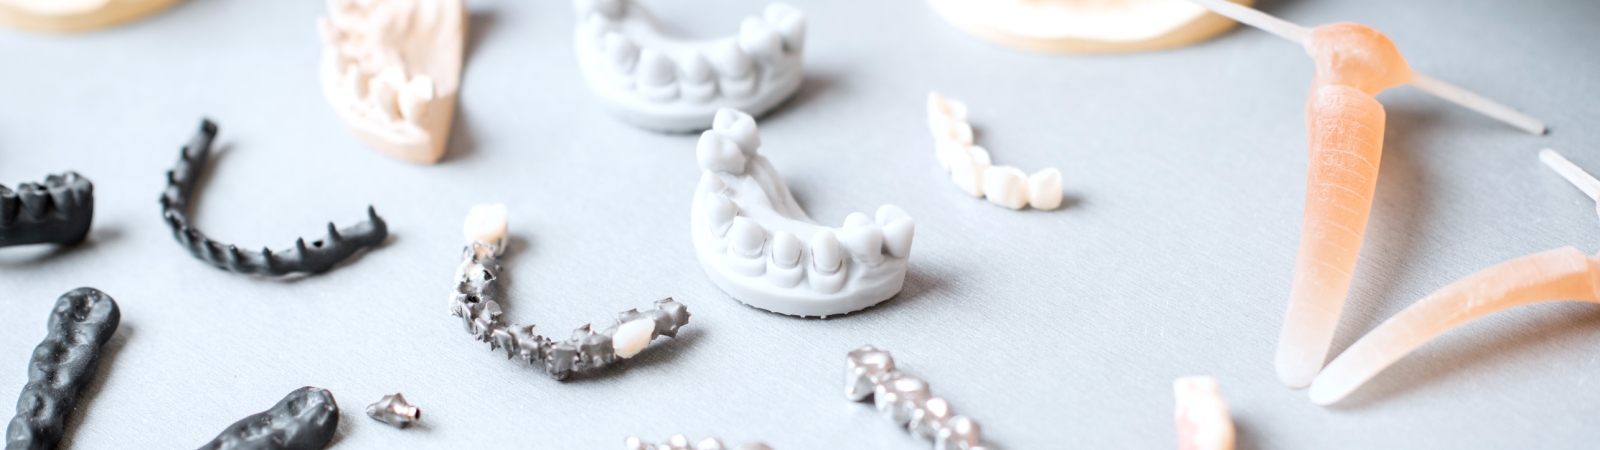 artificial jaw models with dental implants